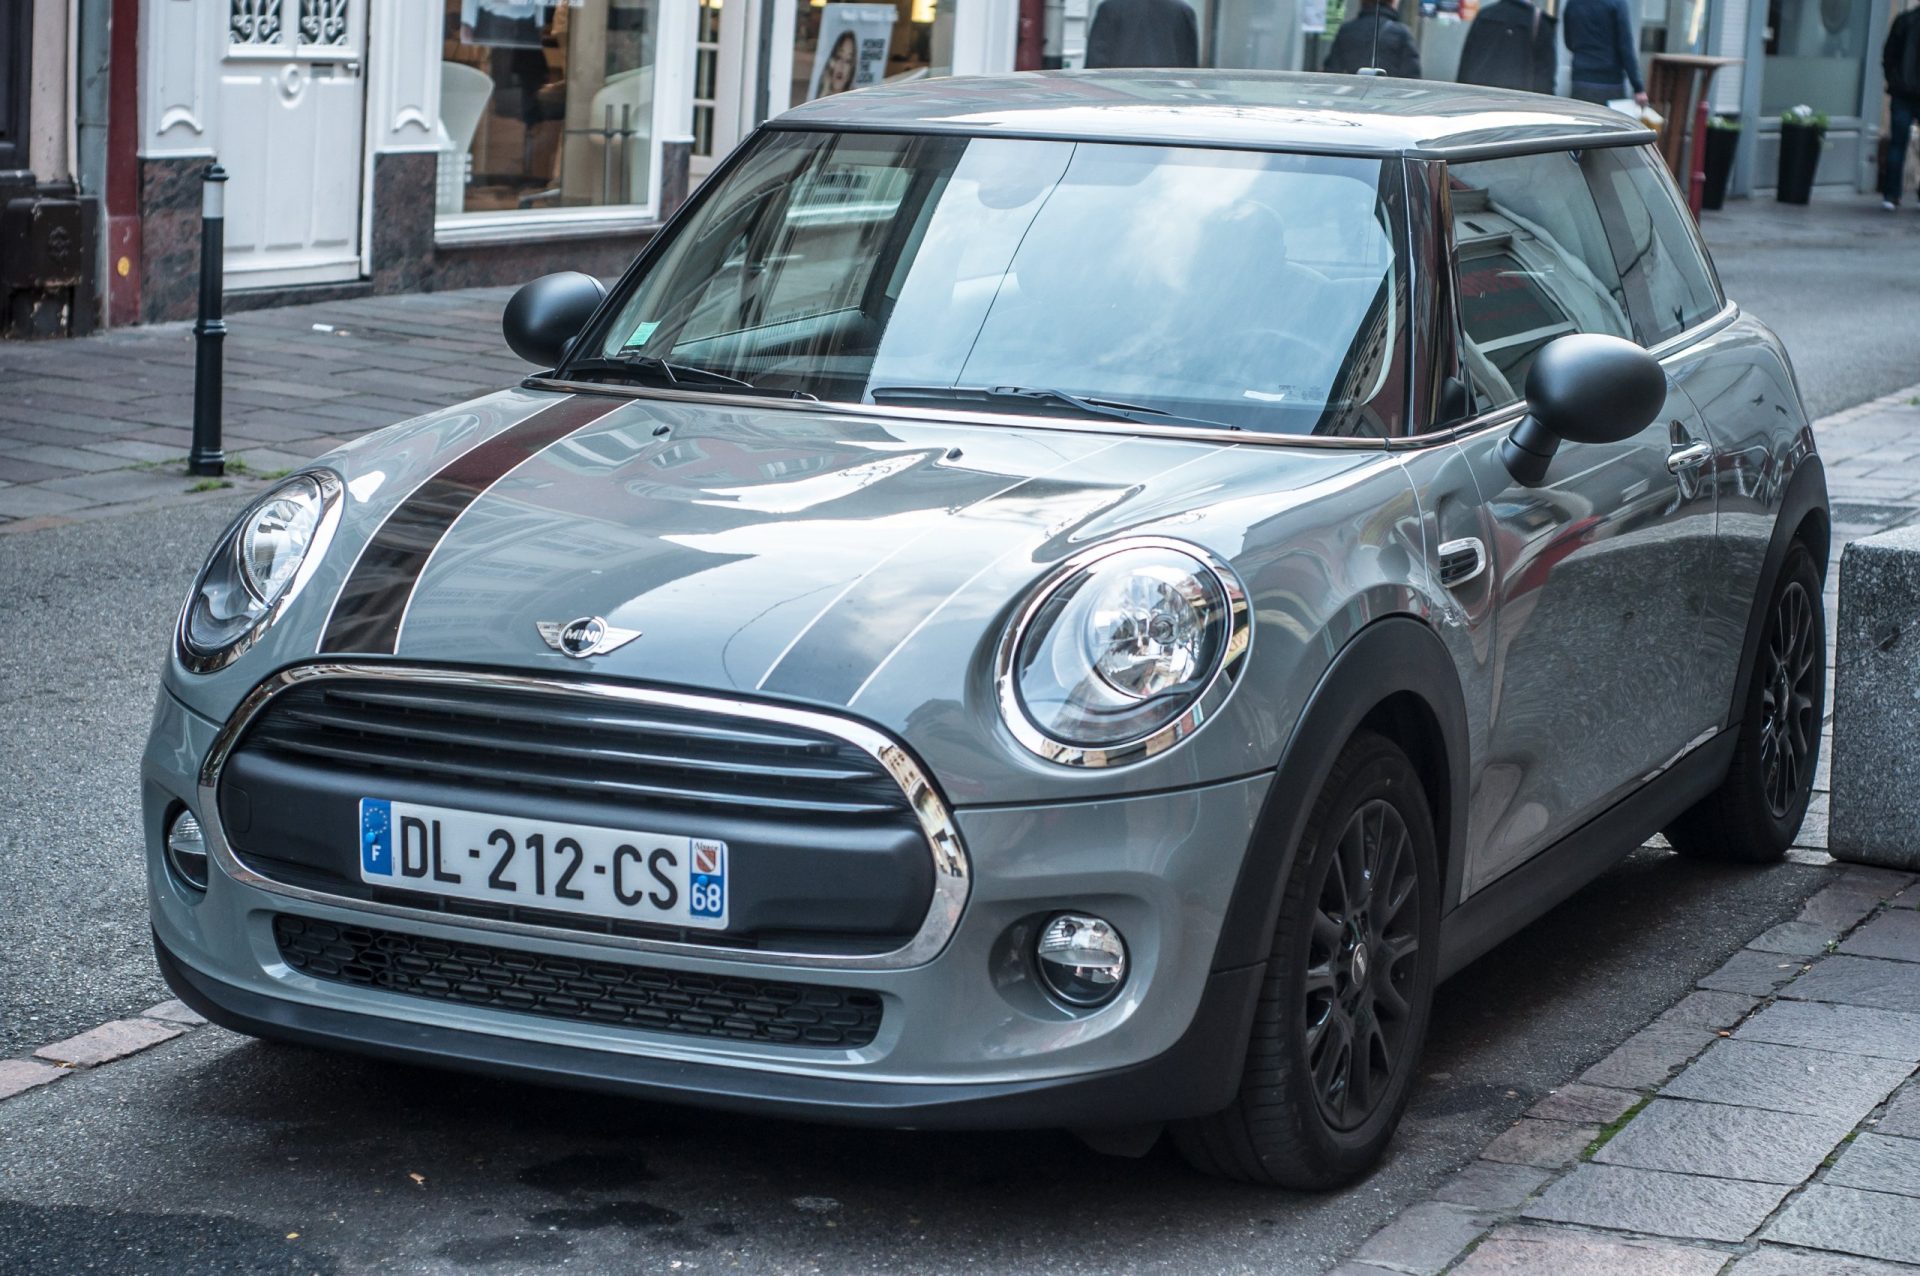 2017 Grey Mini Cooper parked in the street